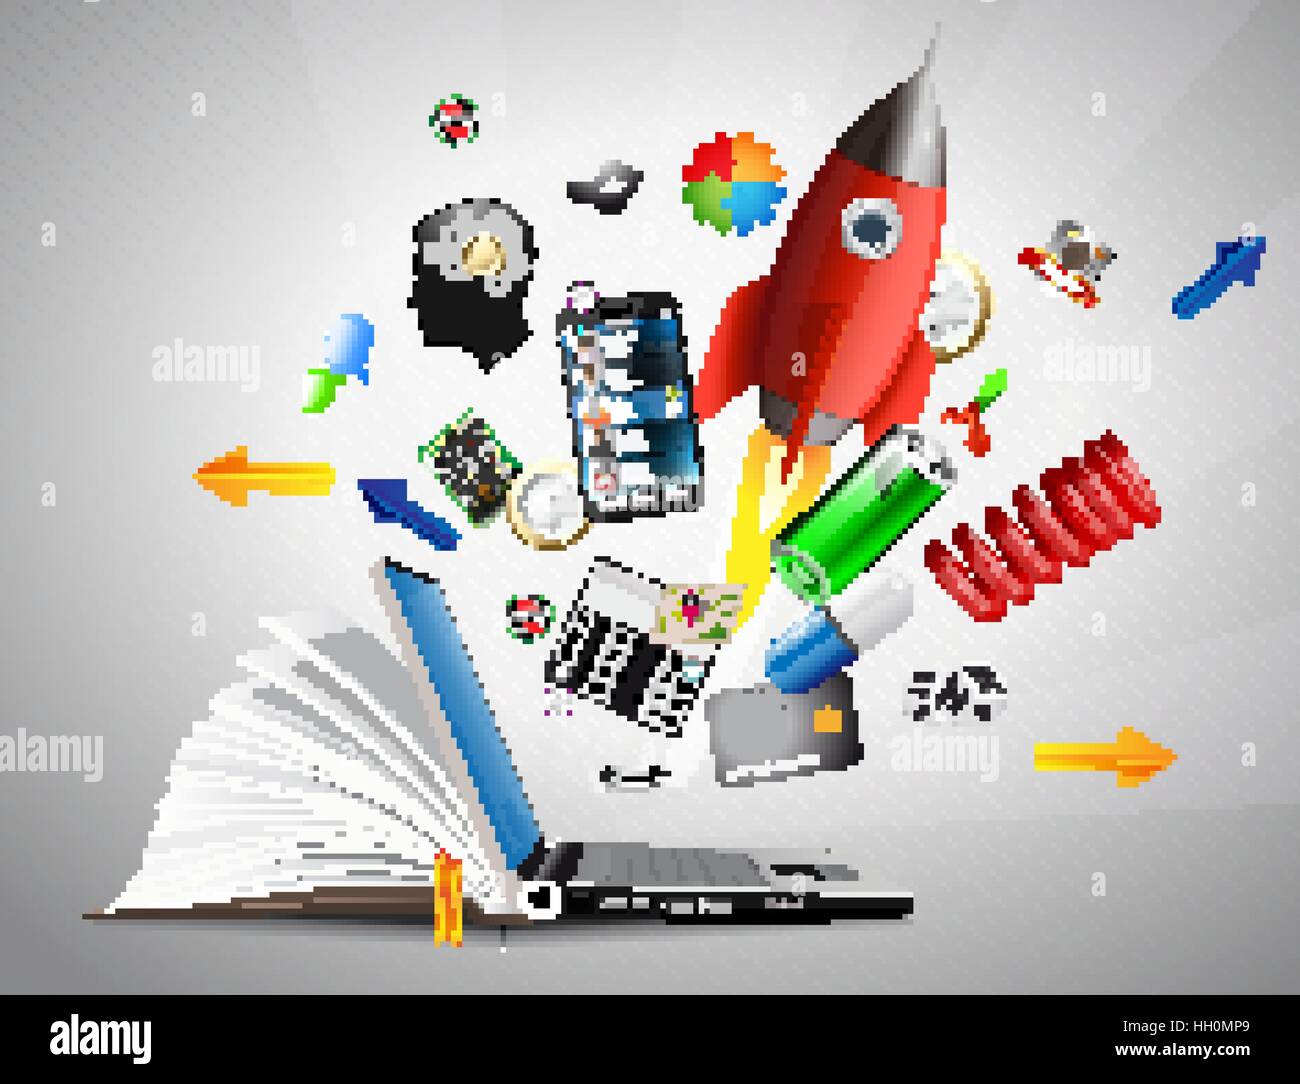 E-learning concept - internet network as knowledge base Stock Vector